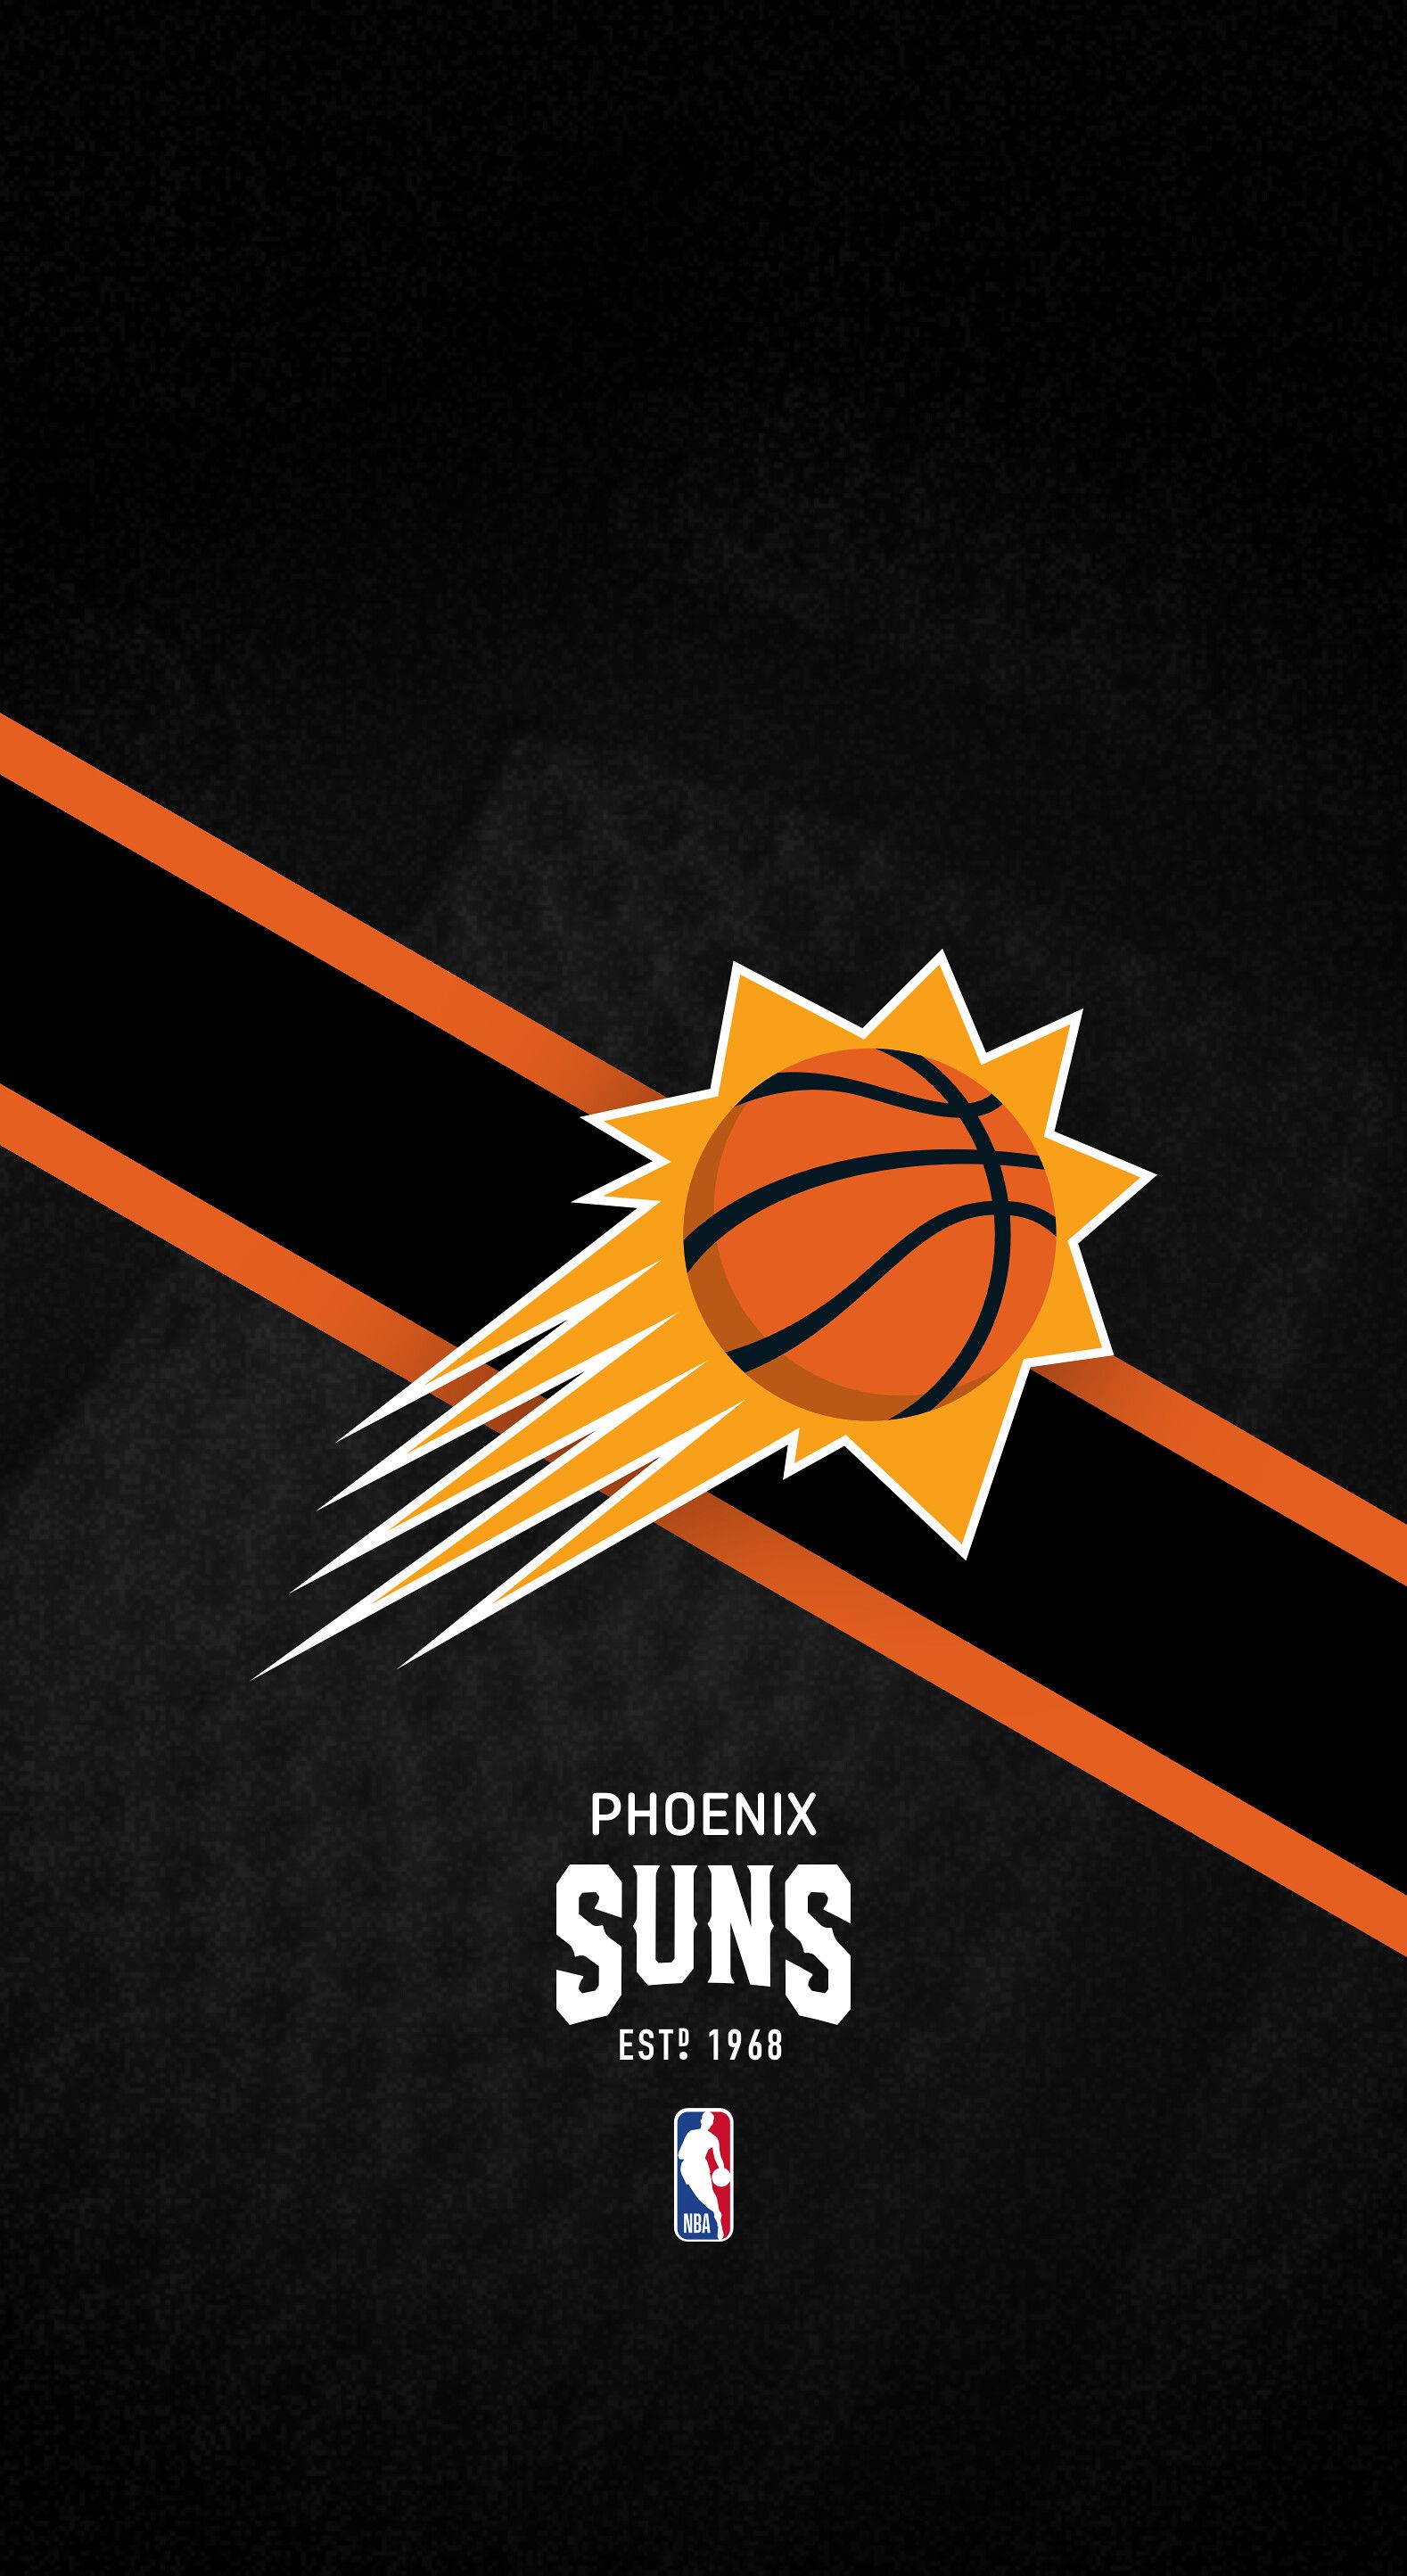 Phoenix Suns on Twitter We know you needed these as a wallpaper too  httpstcoainLo4VbZK  Twitter